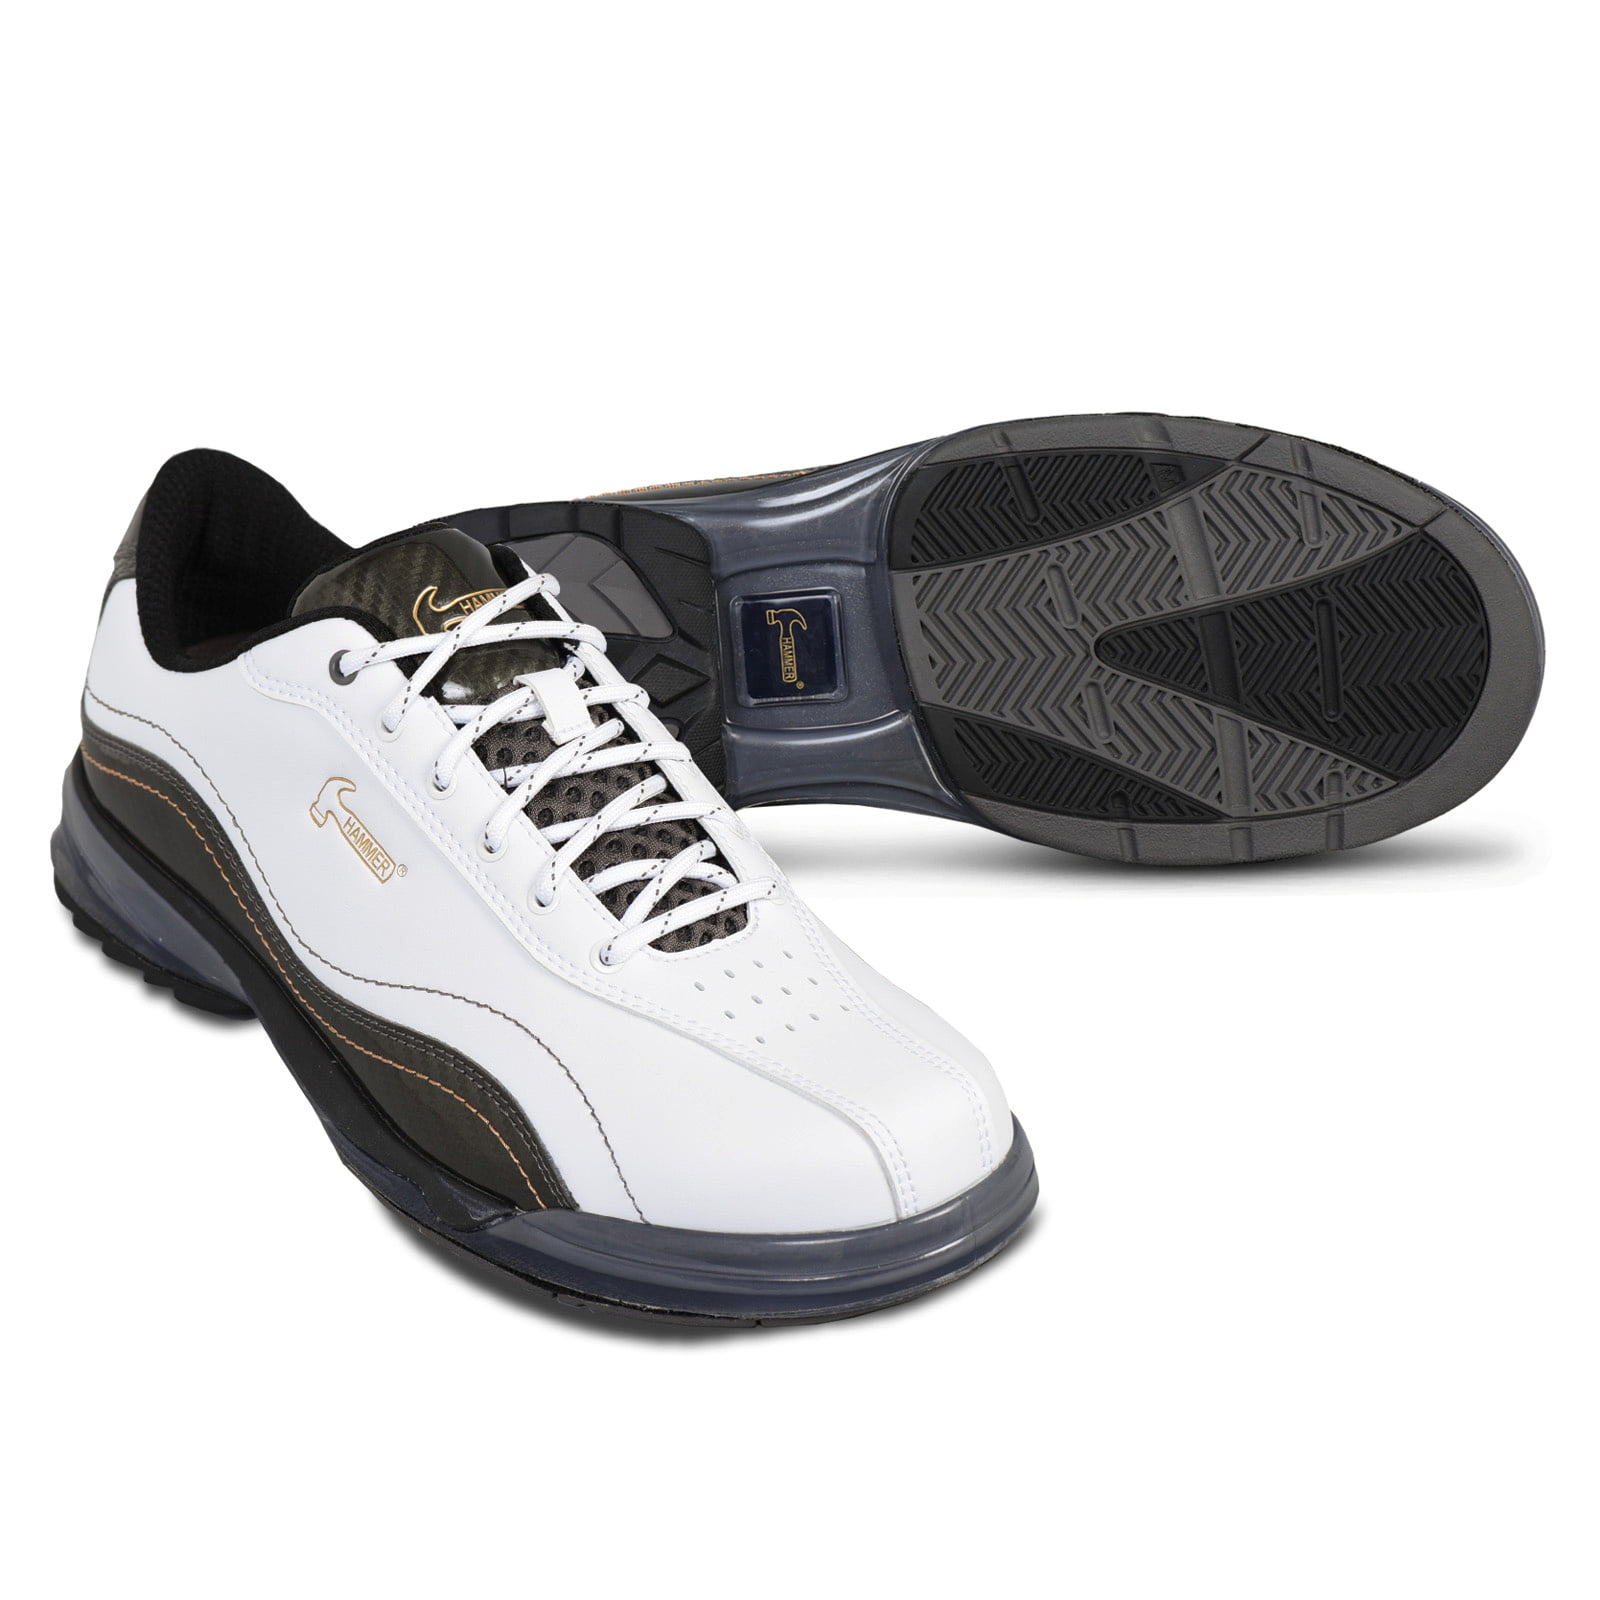 Hammer Force Mens Performance Bowling Shoes White Carbon Right Hand 